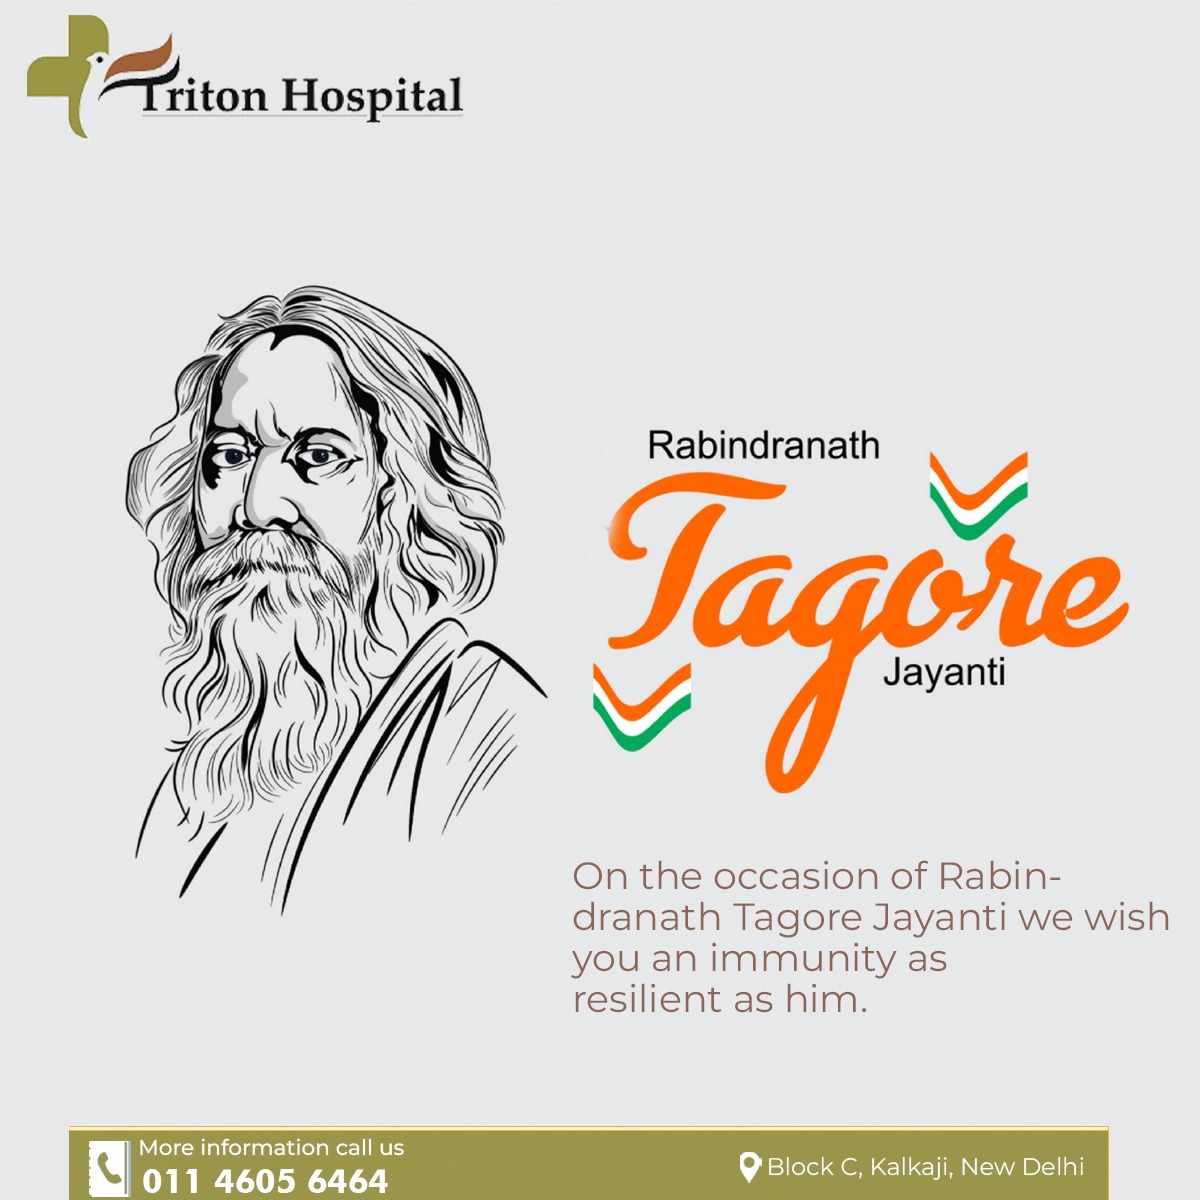 The melodies of Tagore's songs are still as fresh as ever. Happy Rabindranath Tagore Jayanti!

#RabindranathTagoreJayanti #TagoreJayanti #TagoreBirthday #Tagore #BengaliLiterature #IndianLiterature #NobelLaureate #Triton #Treatment #care #tritonhospital